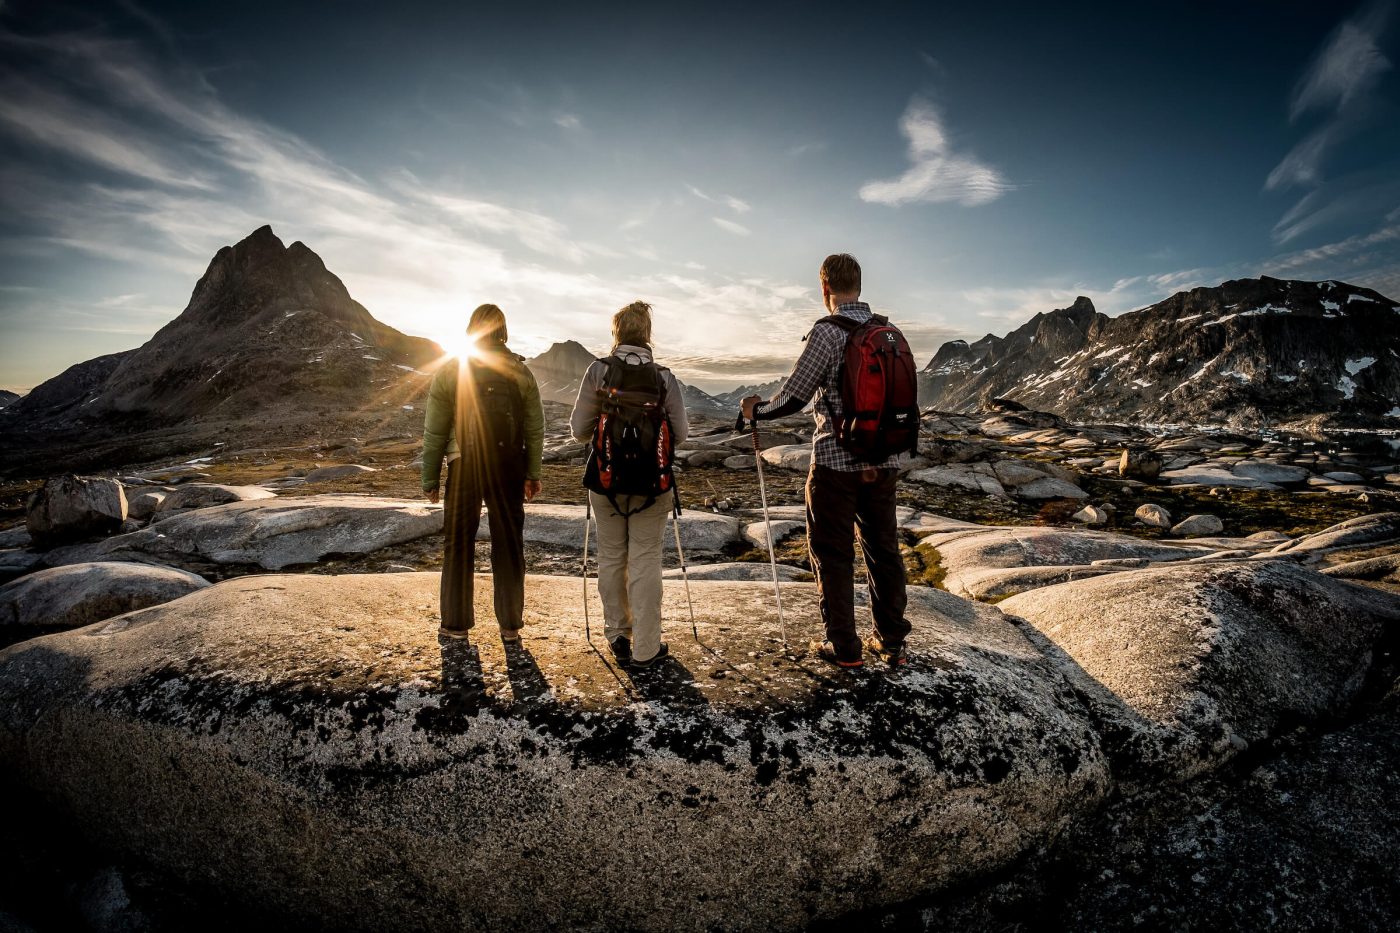 Three hikers in the setting sun near Qernertivartivit in East Greenland, by Mads Pihl